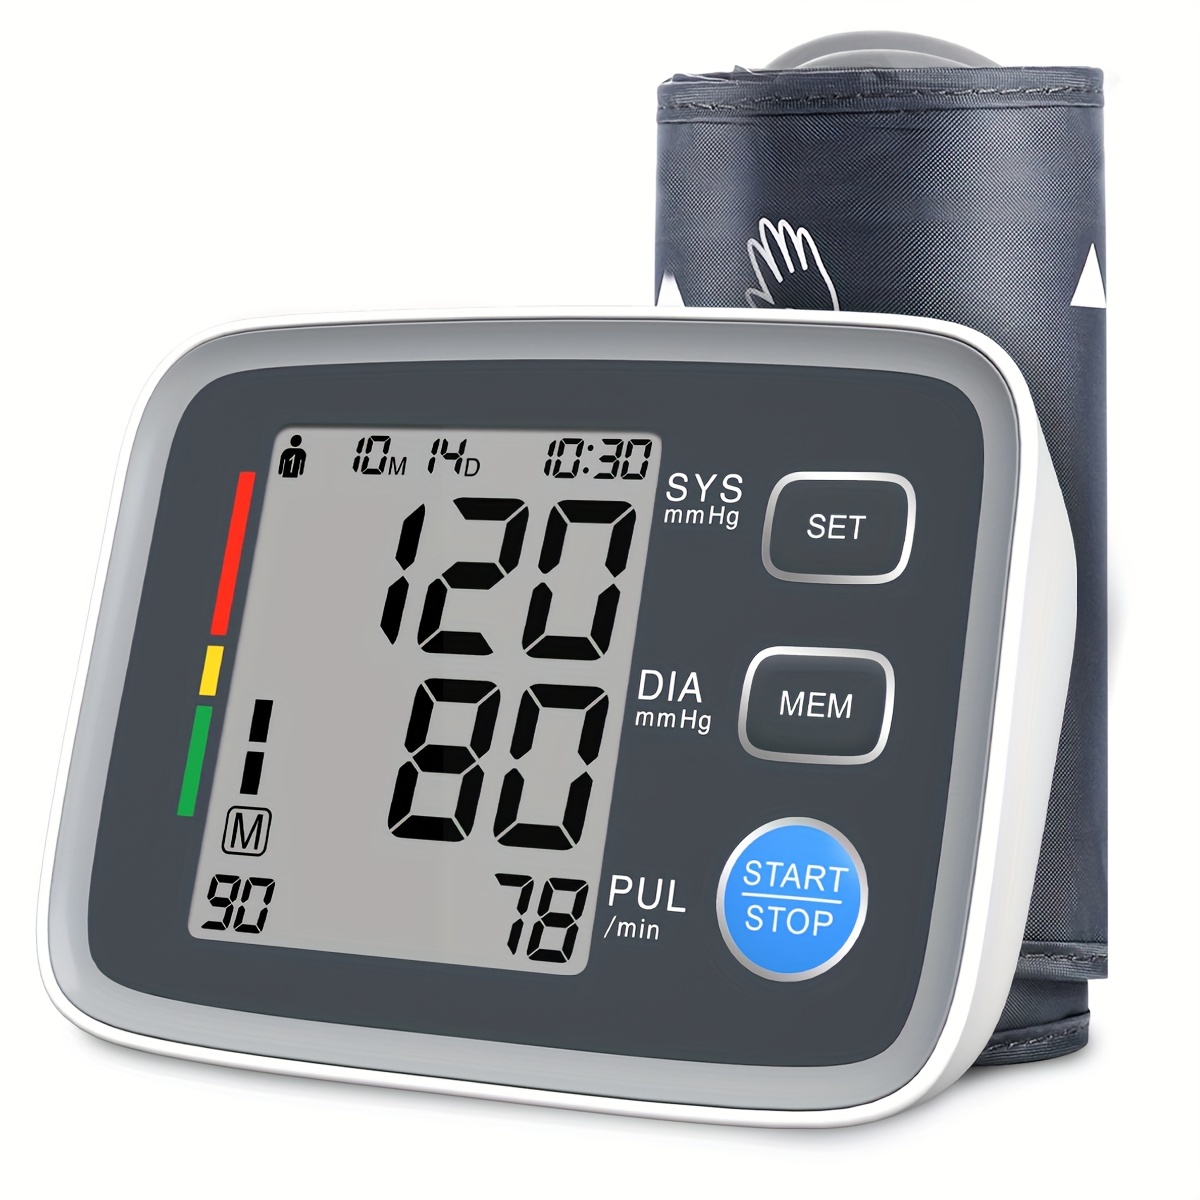 8 Best Blood Pressure Monitors for Home Use, According to a